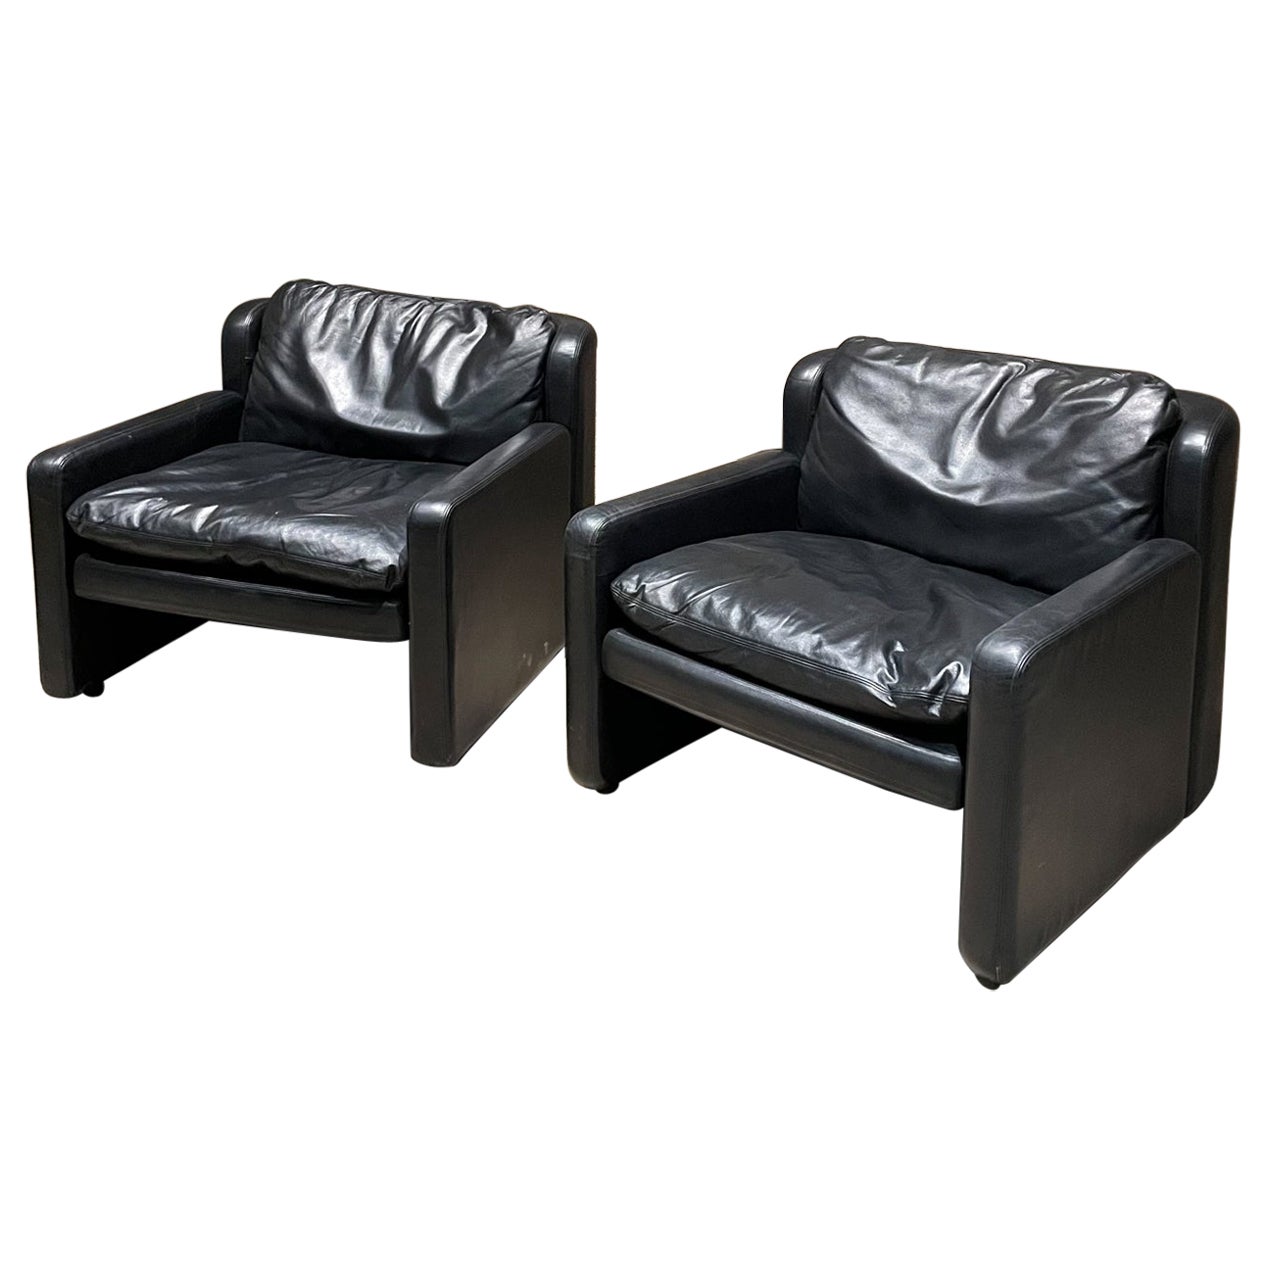 1980s Italian Black Leather Club Lounge Chairs Low Profile by Arflex of Italy For Sale